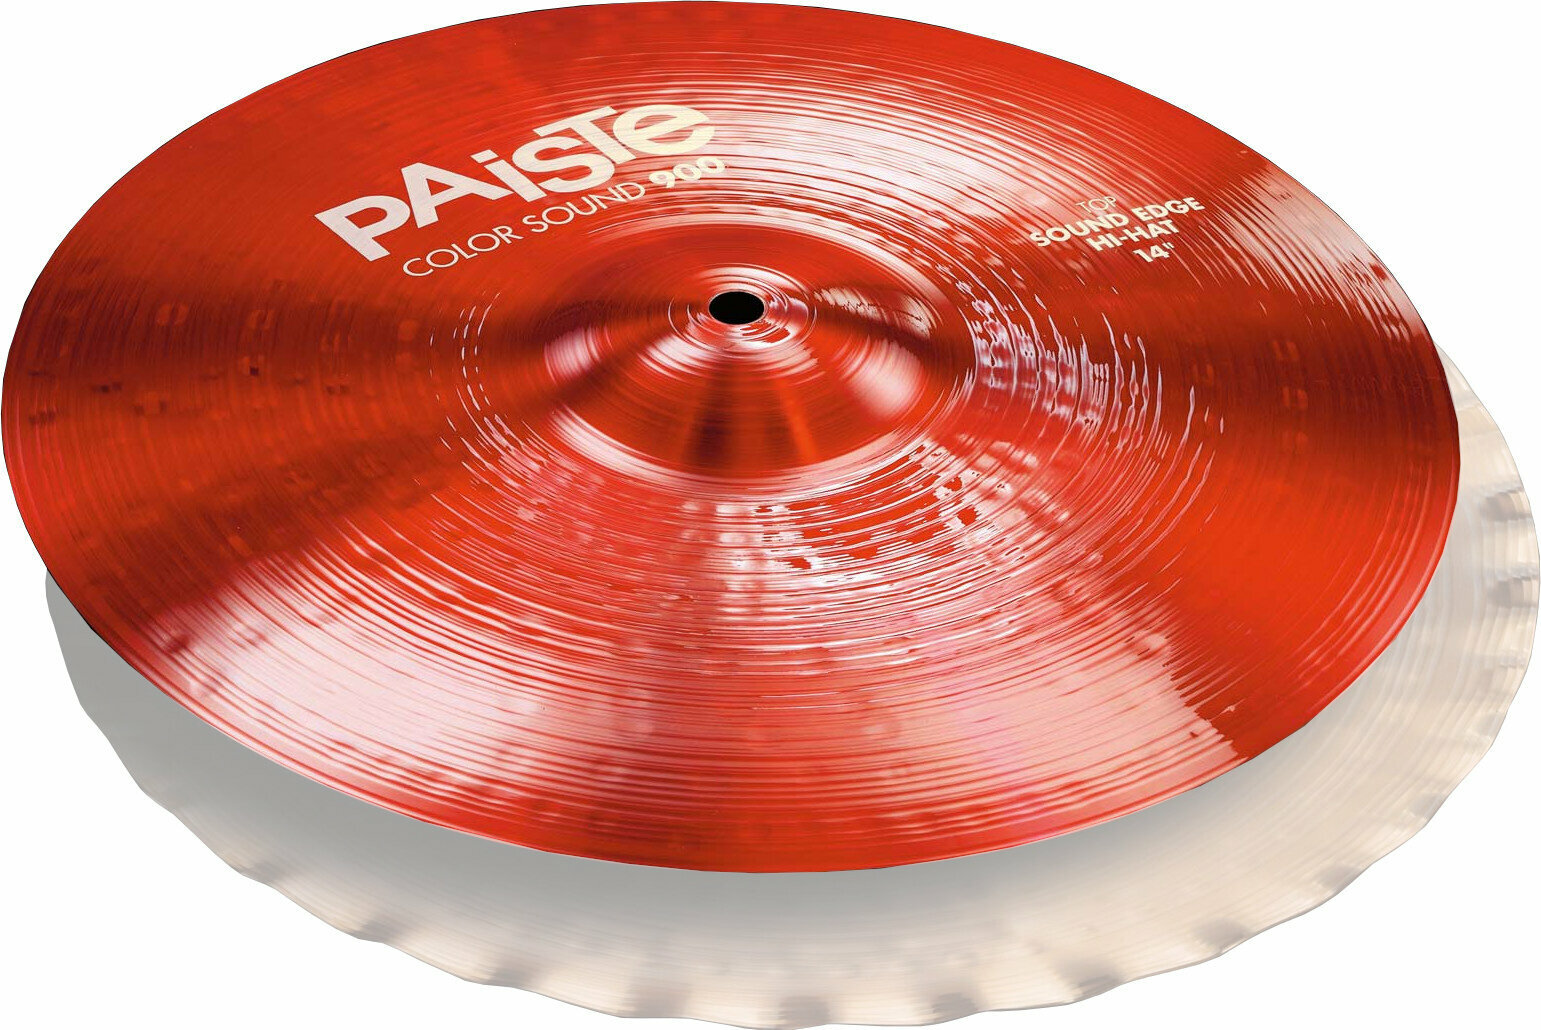 Cymbale charleston Paiste Color Sound 900  Sound Edge Top Cymbale charleston 14" Rouge